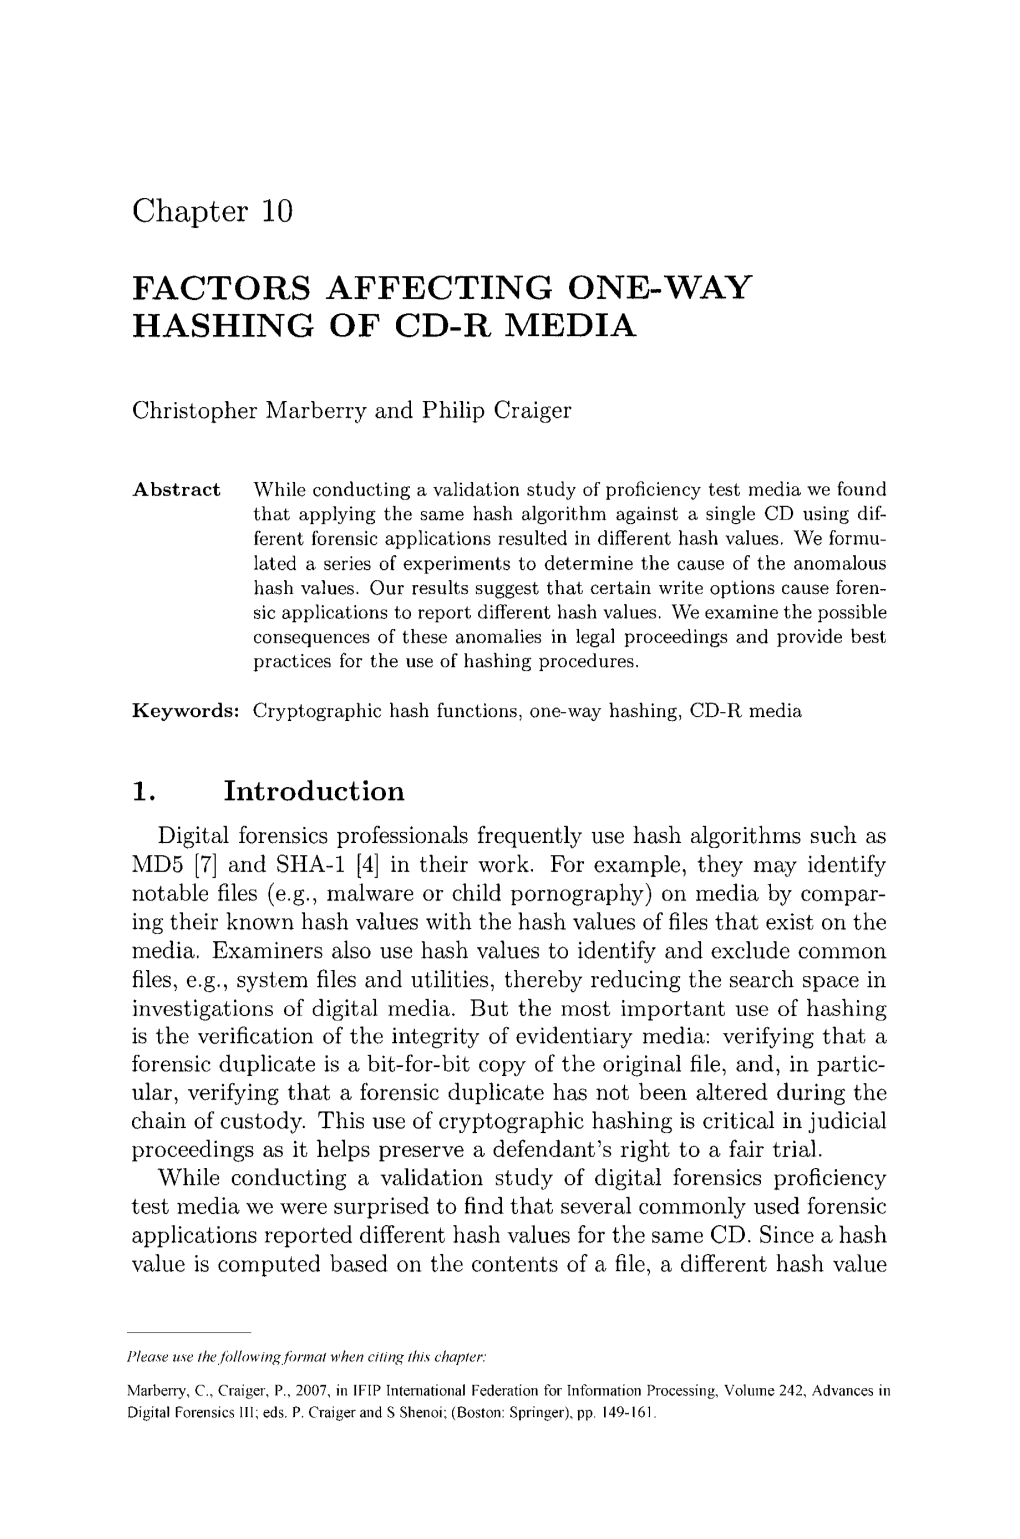 Chapter 10 FACTORS AFFECTING ONE-WAY HASHING of CD-R